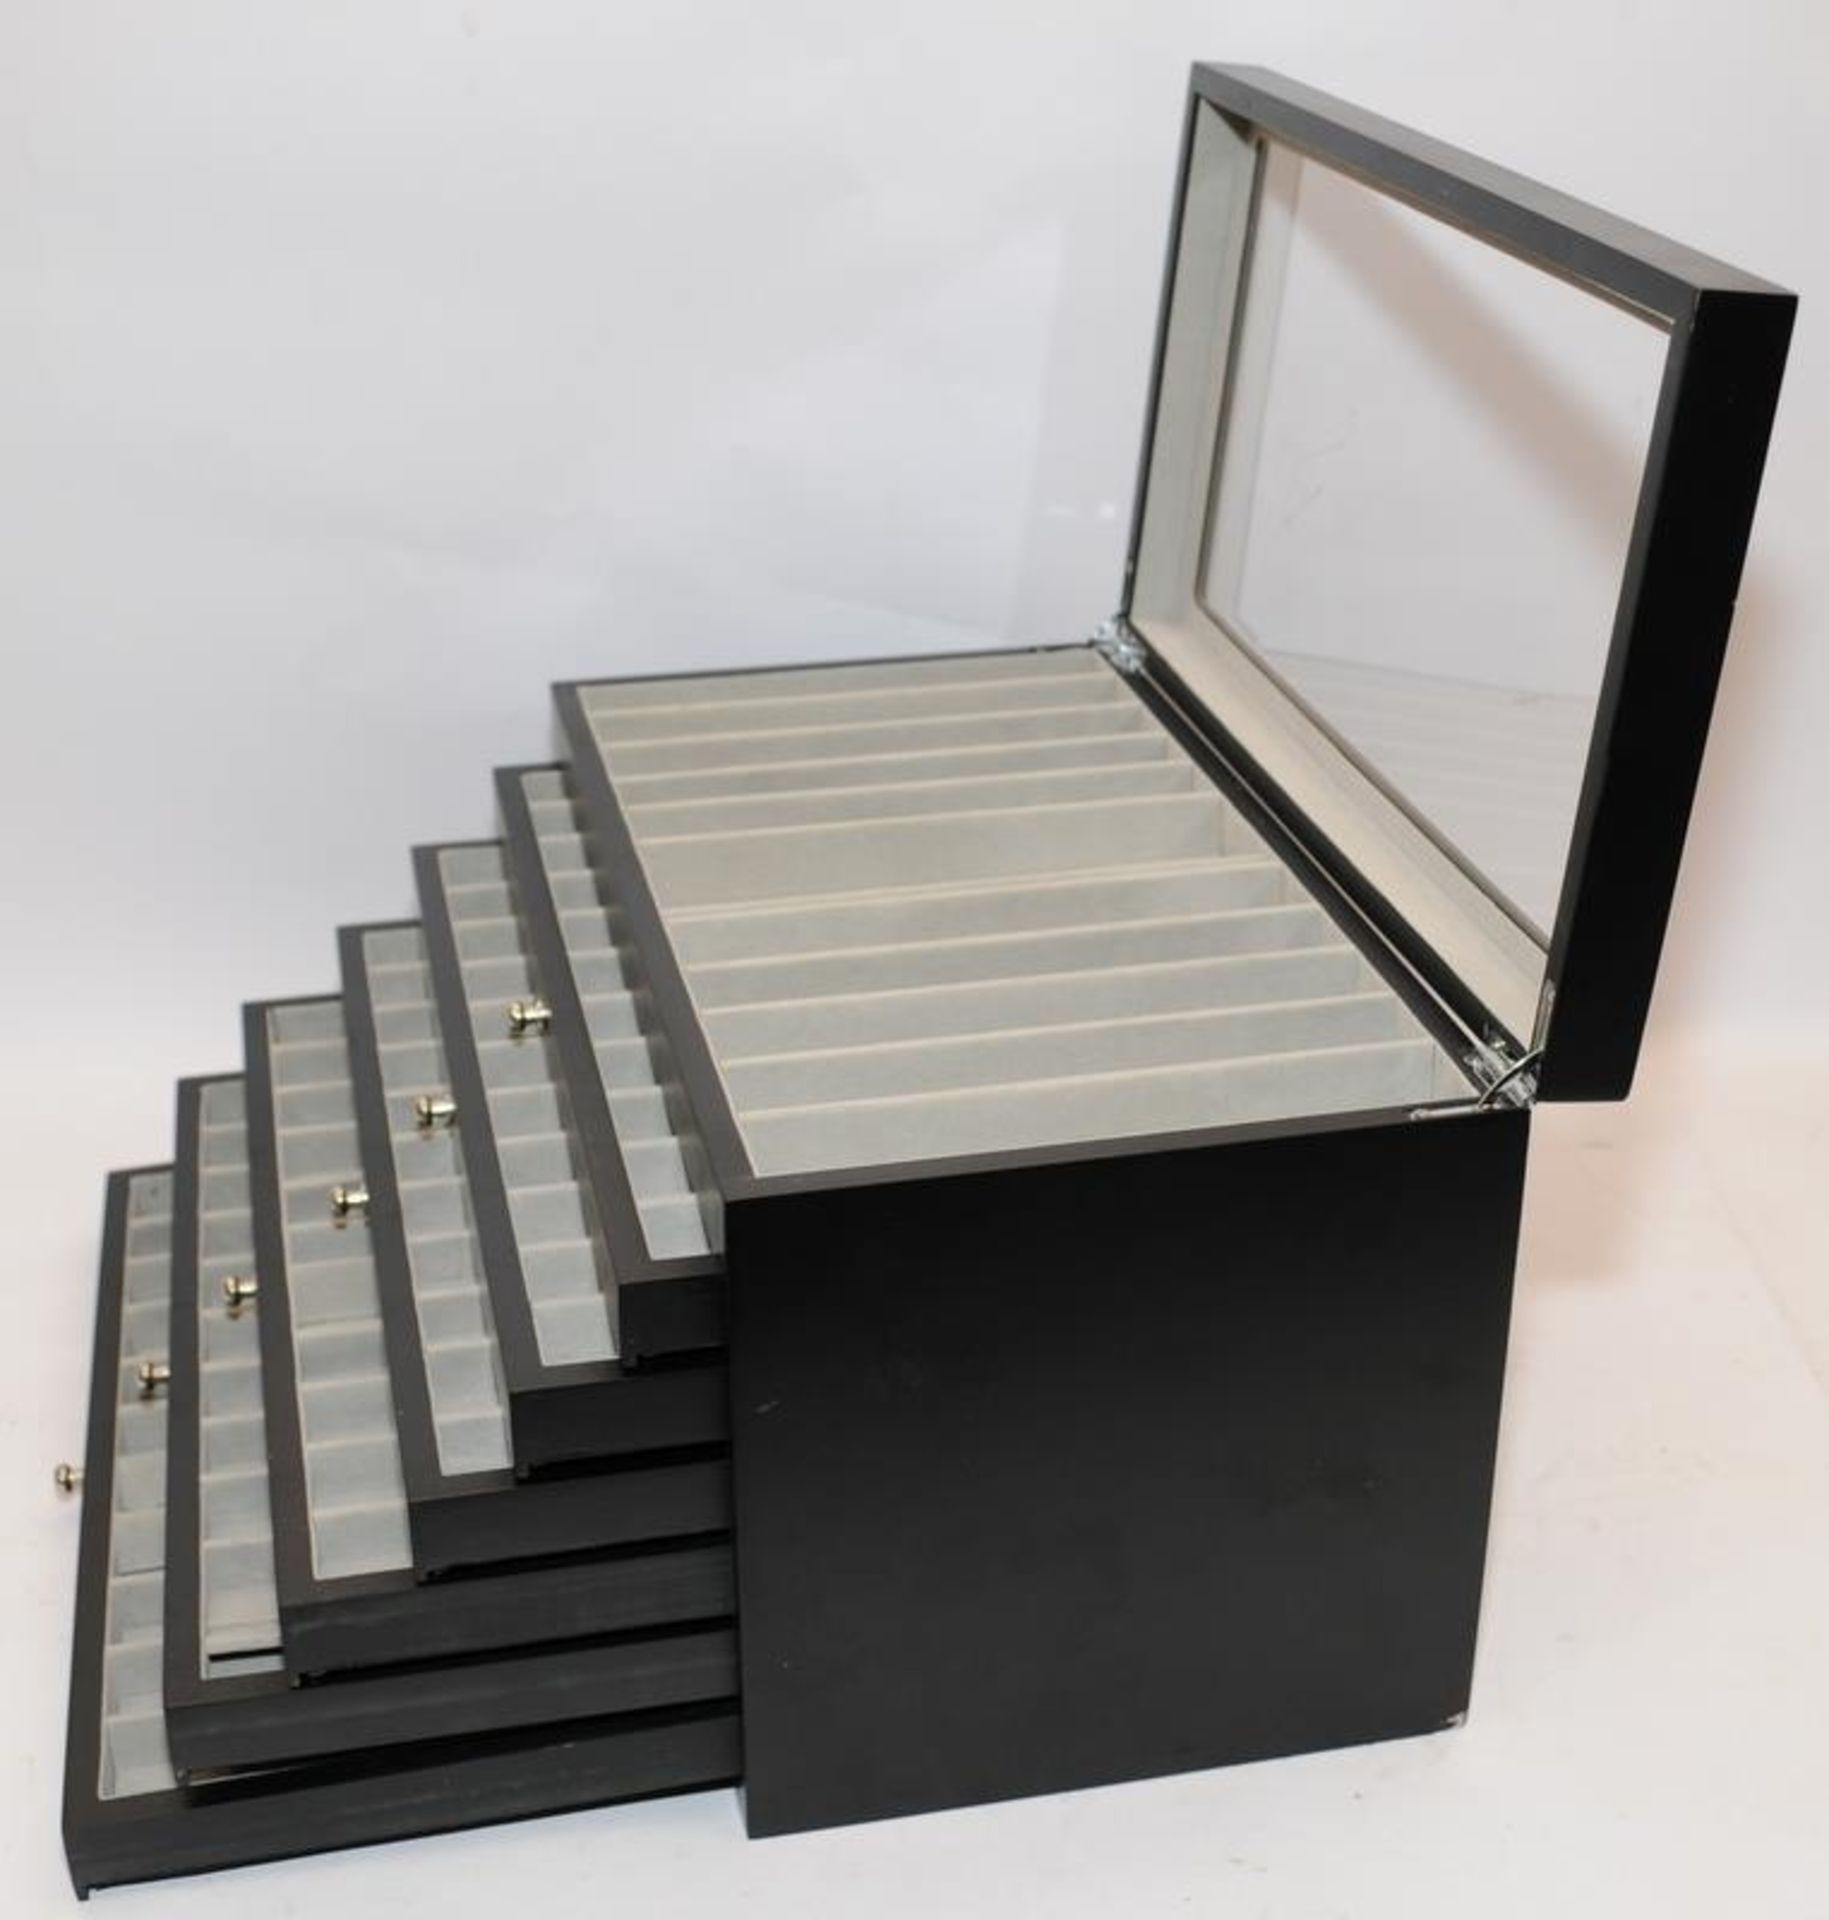 Quality storage/display box for pens. Hinged lid over 6 drawers capable of storing up to 78 pens. - Image 4 of 4